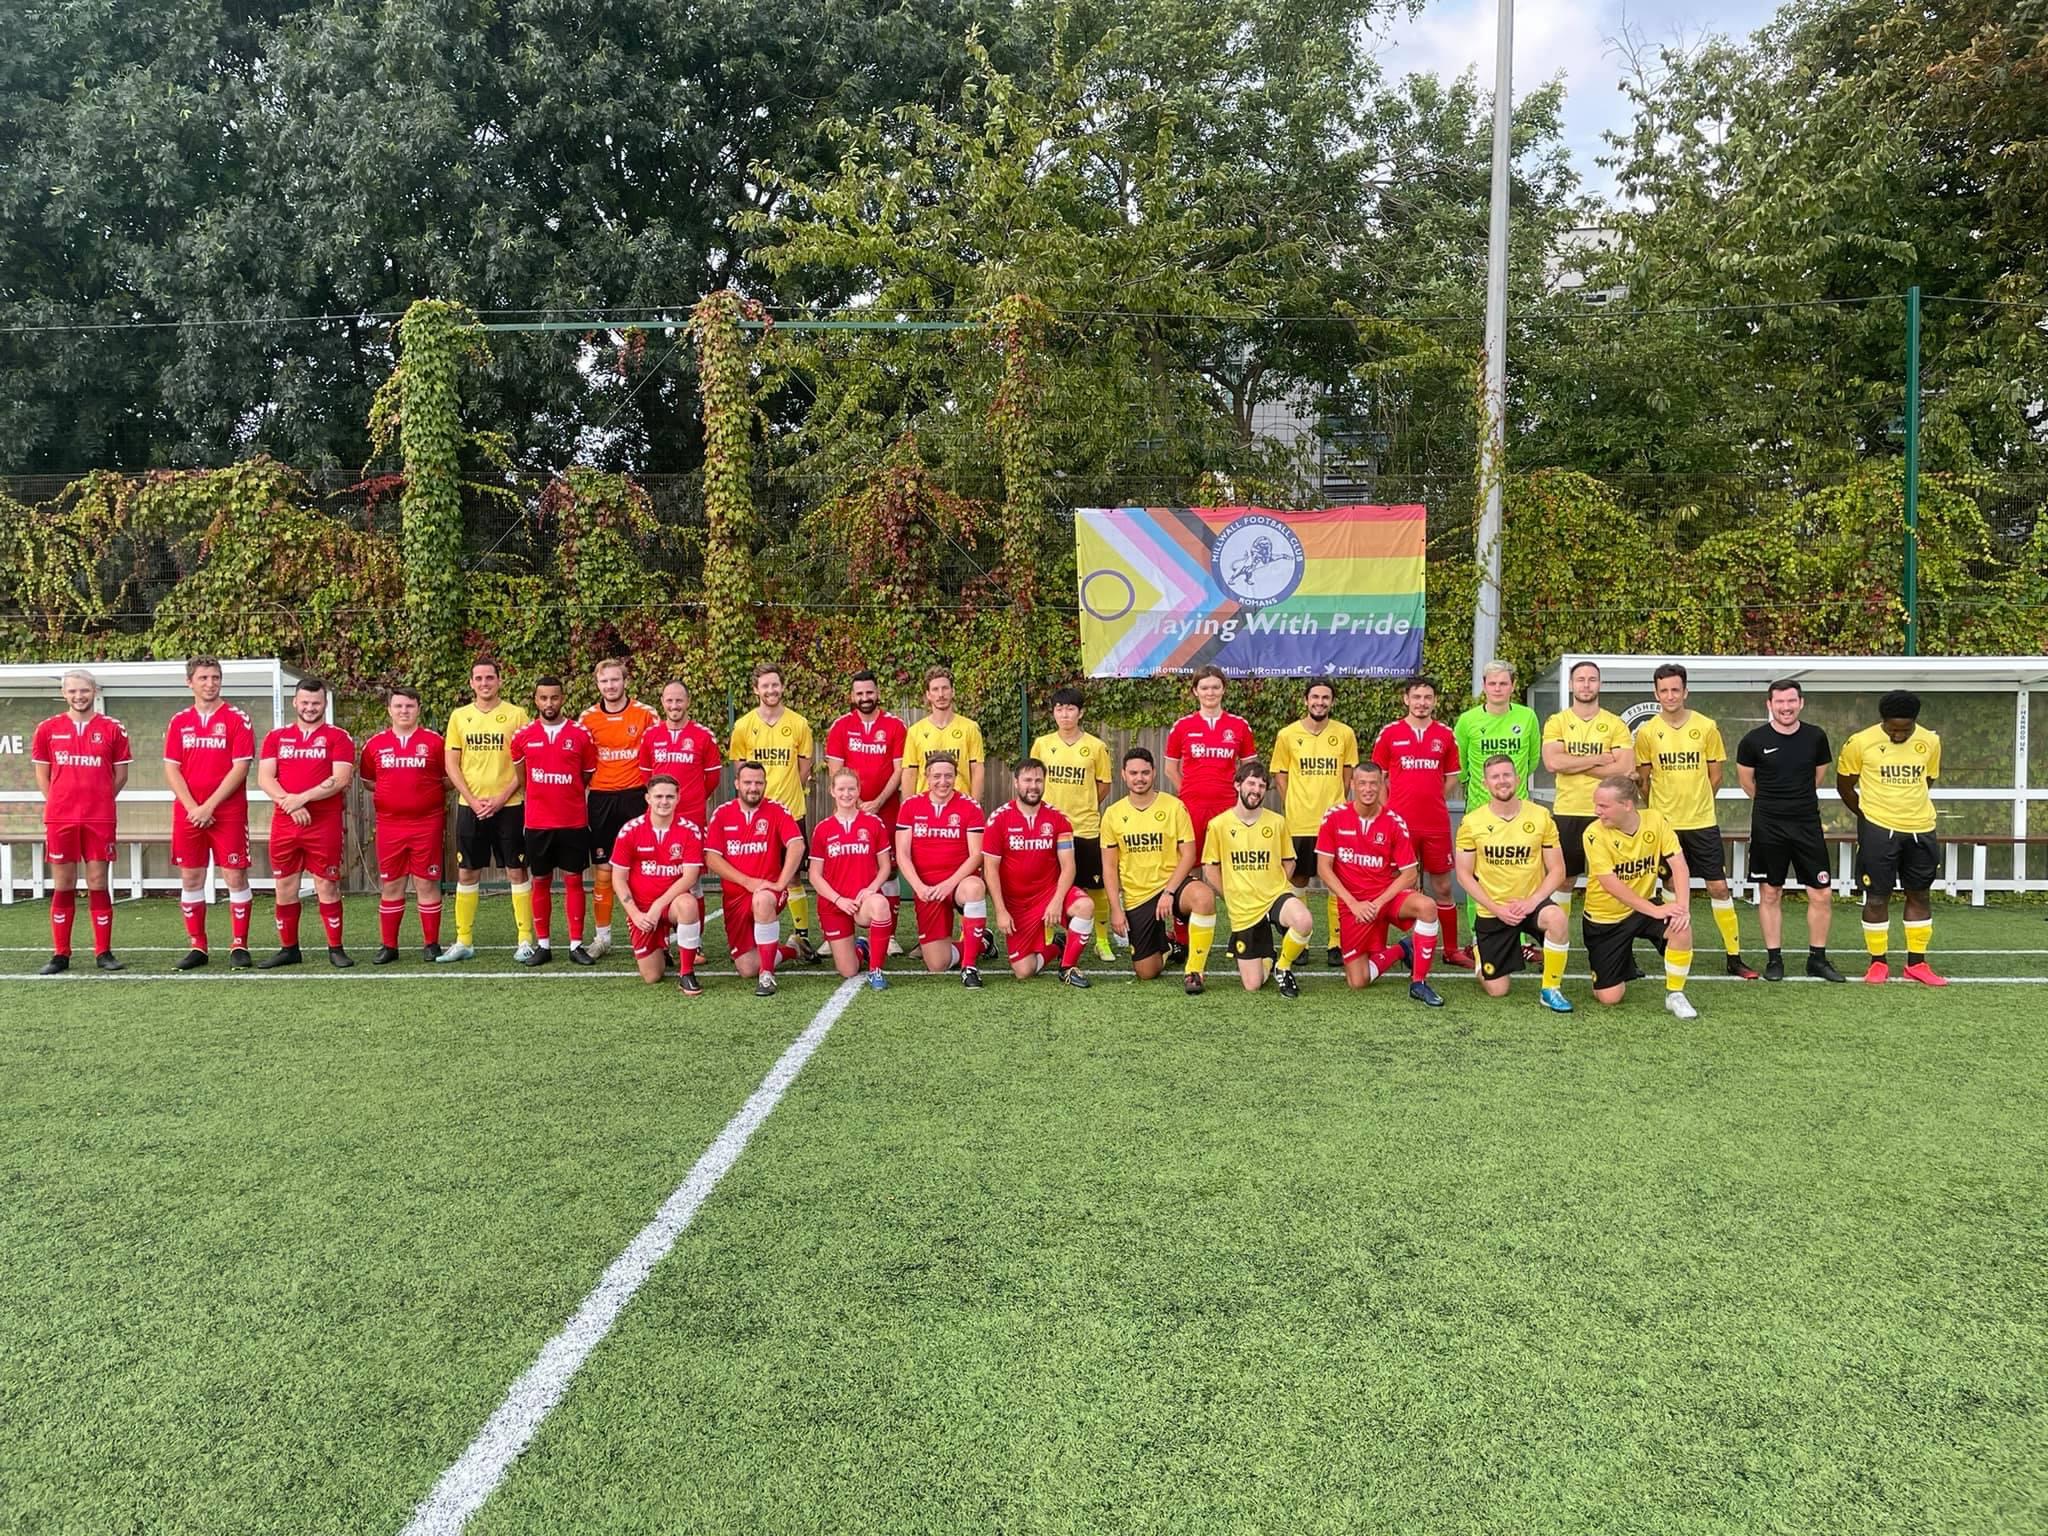 Millwall Community Trust - Safe Space: The LGBTQ+ South London Derby